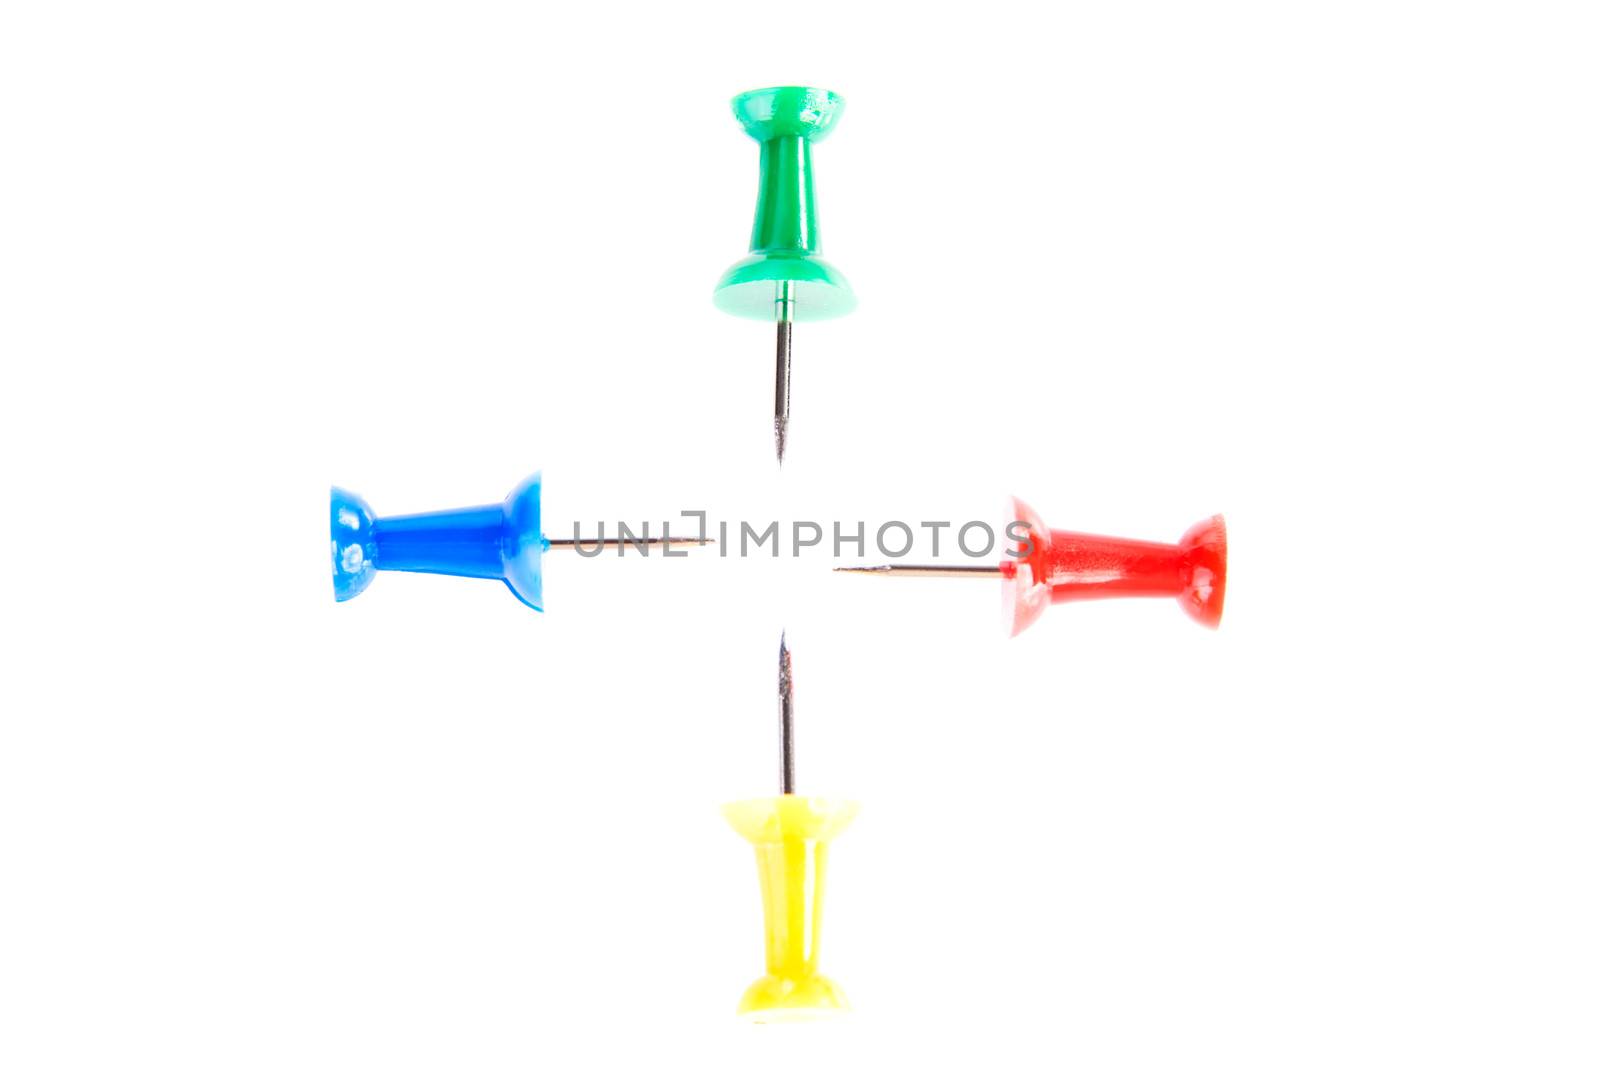 Four colorful drawing pins. Isolated on white.